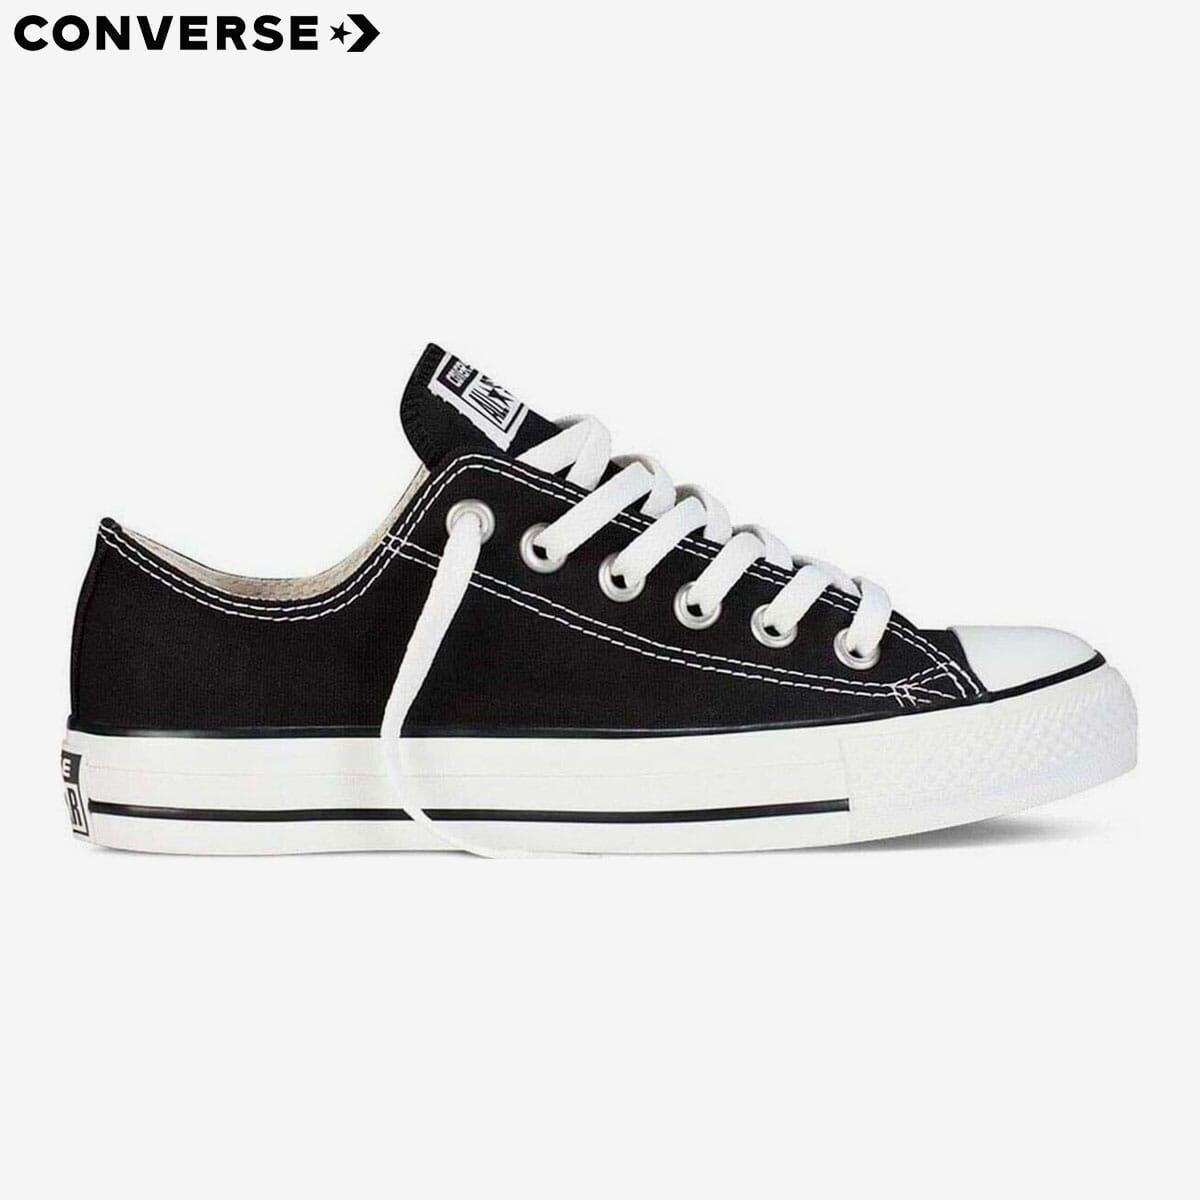 converse black chuck taylor all star low top sneakers for unisex m9166c